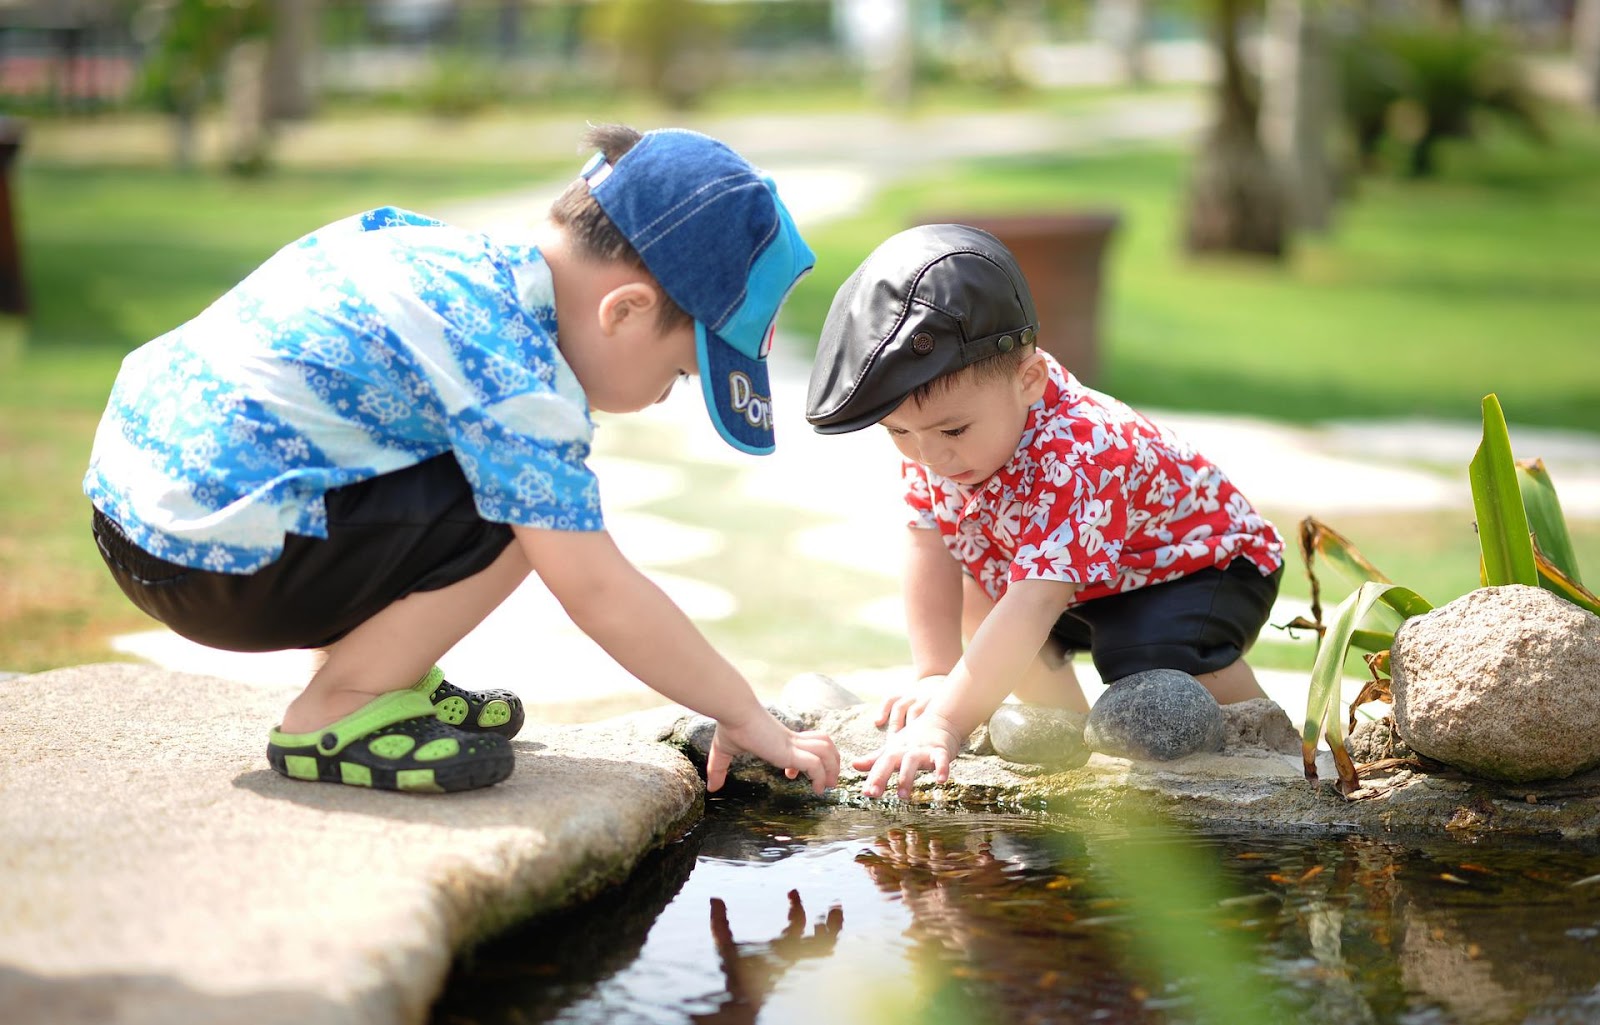 Two preschool children playing together in water